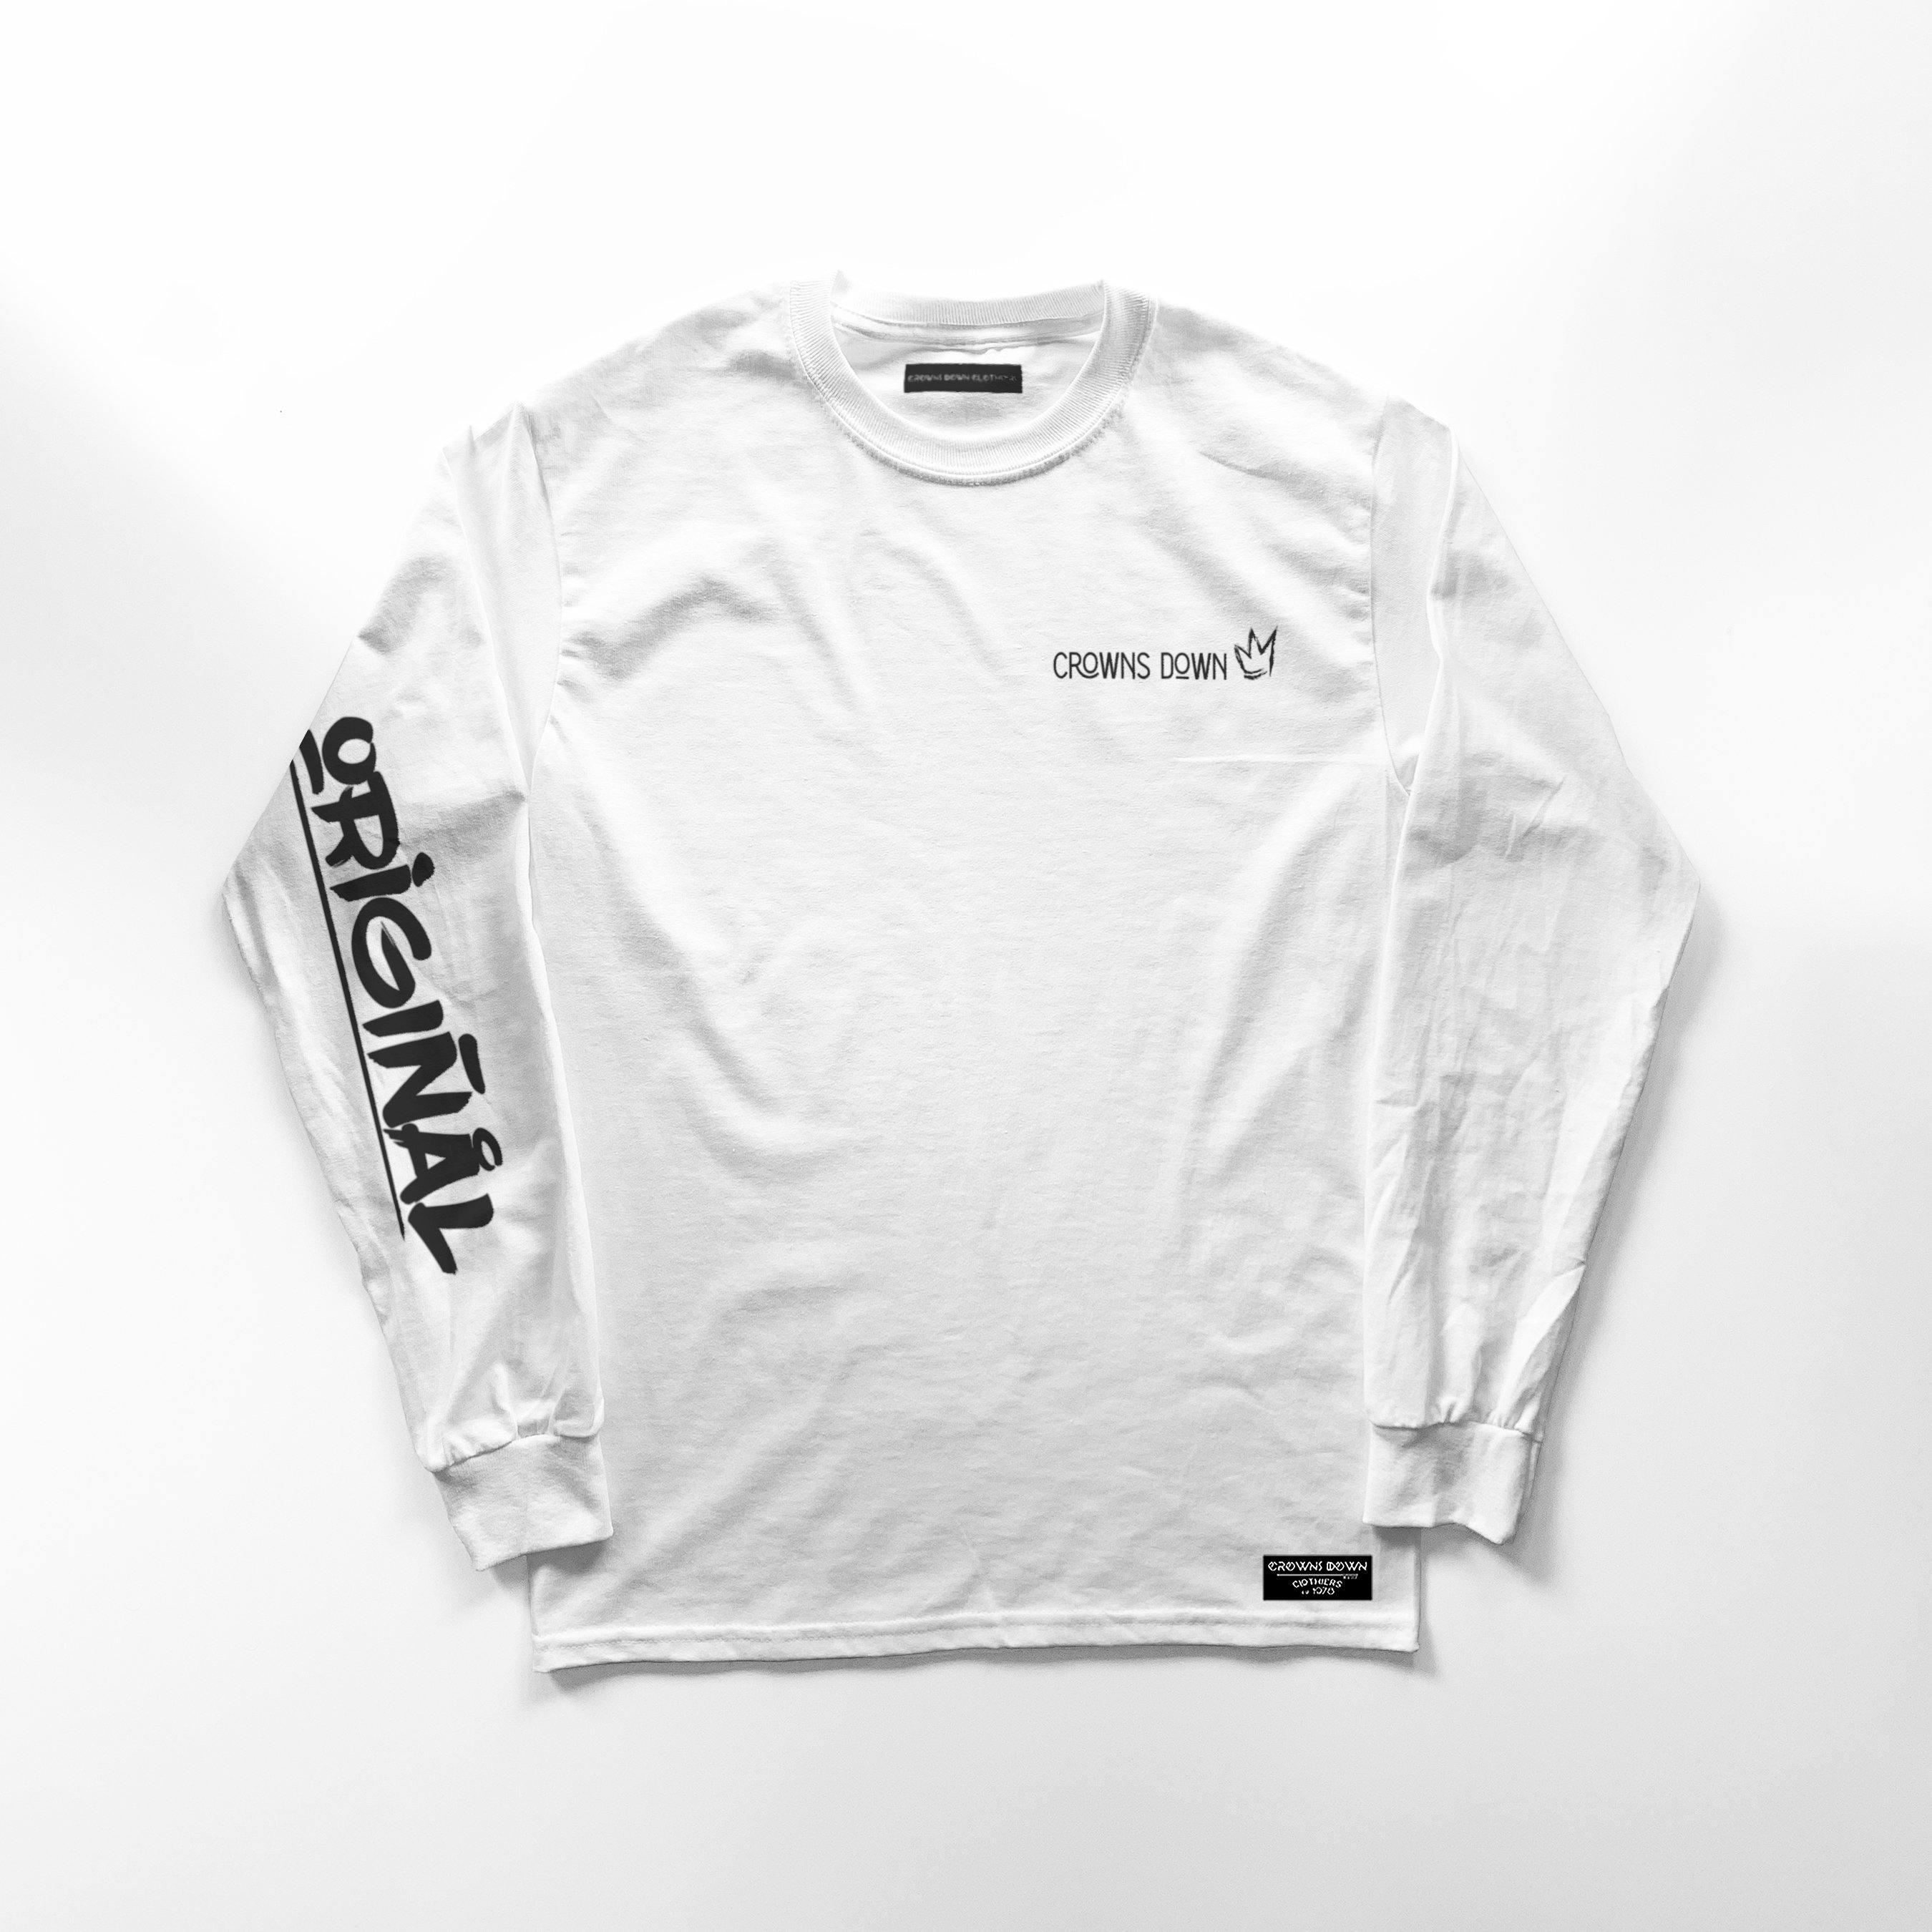 Supreme The Real Shirt White Long Sleeve Cotton Top Men's Top Tee  Size:Large